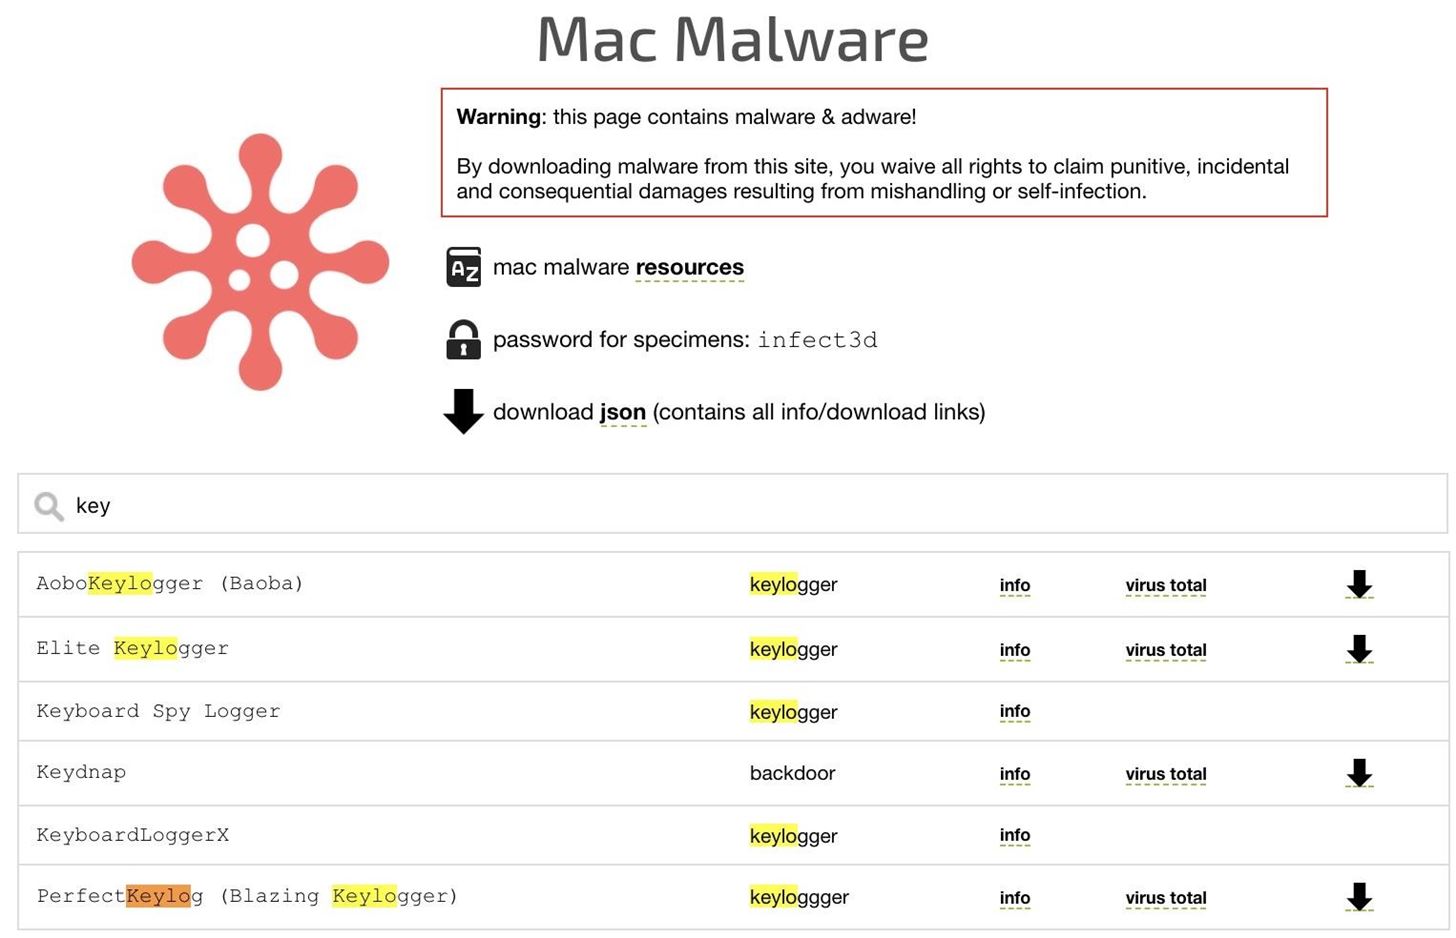 How to Check Your MacOS Computer for Malware & Keyloggers